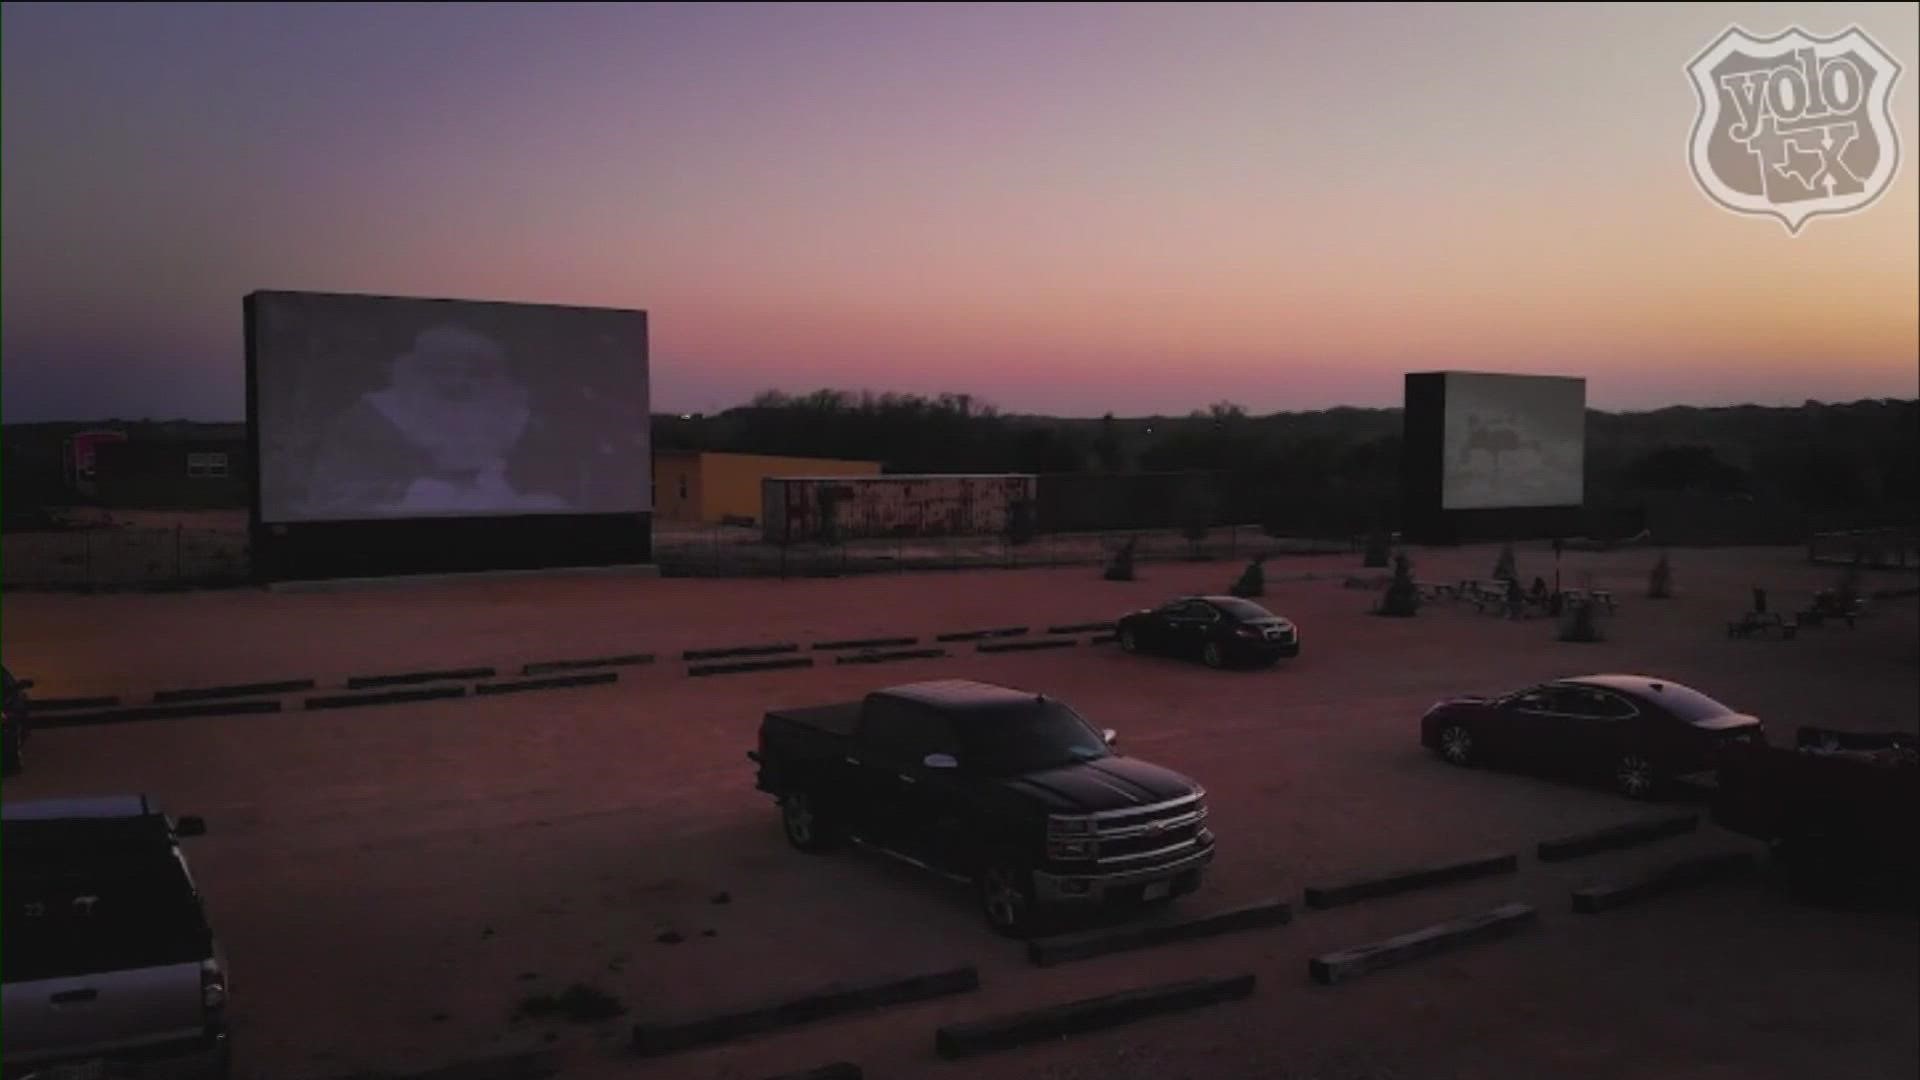 Texas movie lovers have a chance to purchase their own drive-in theater!